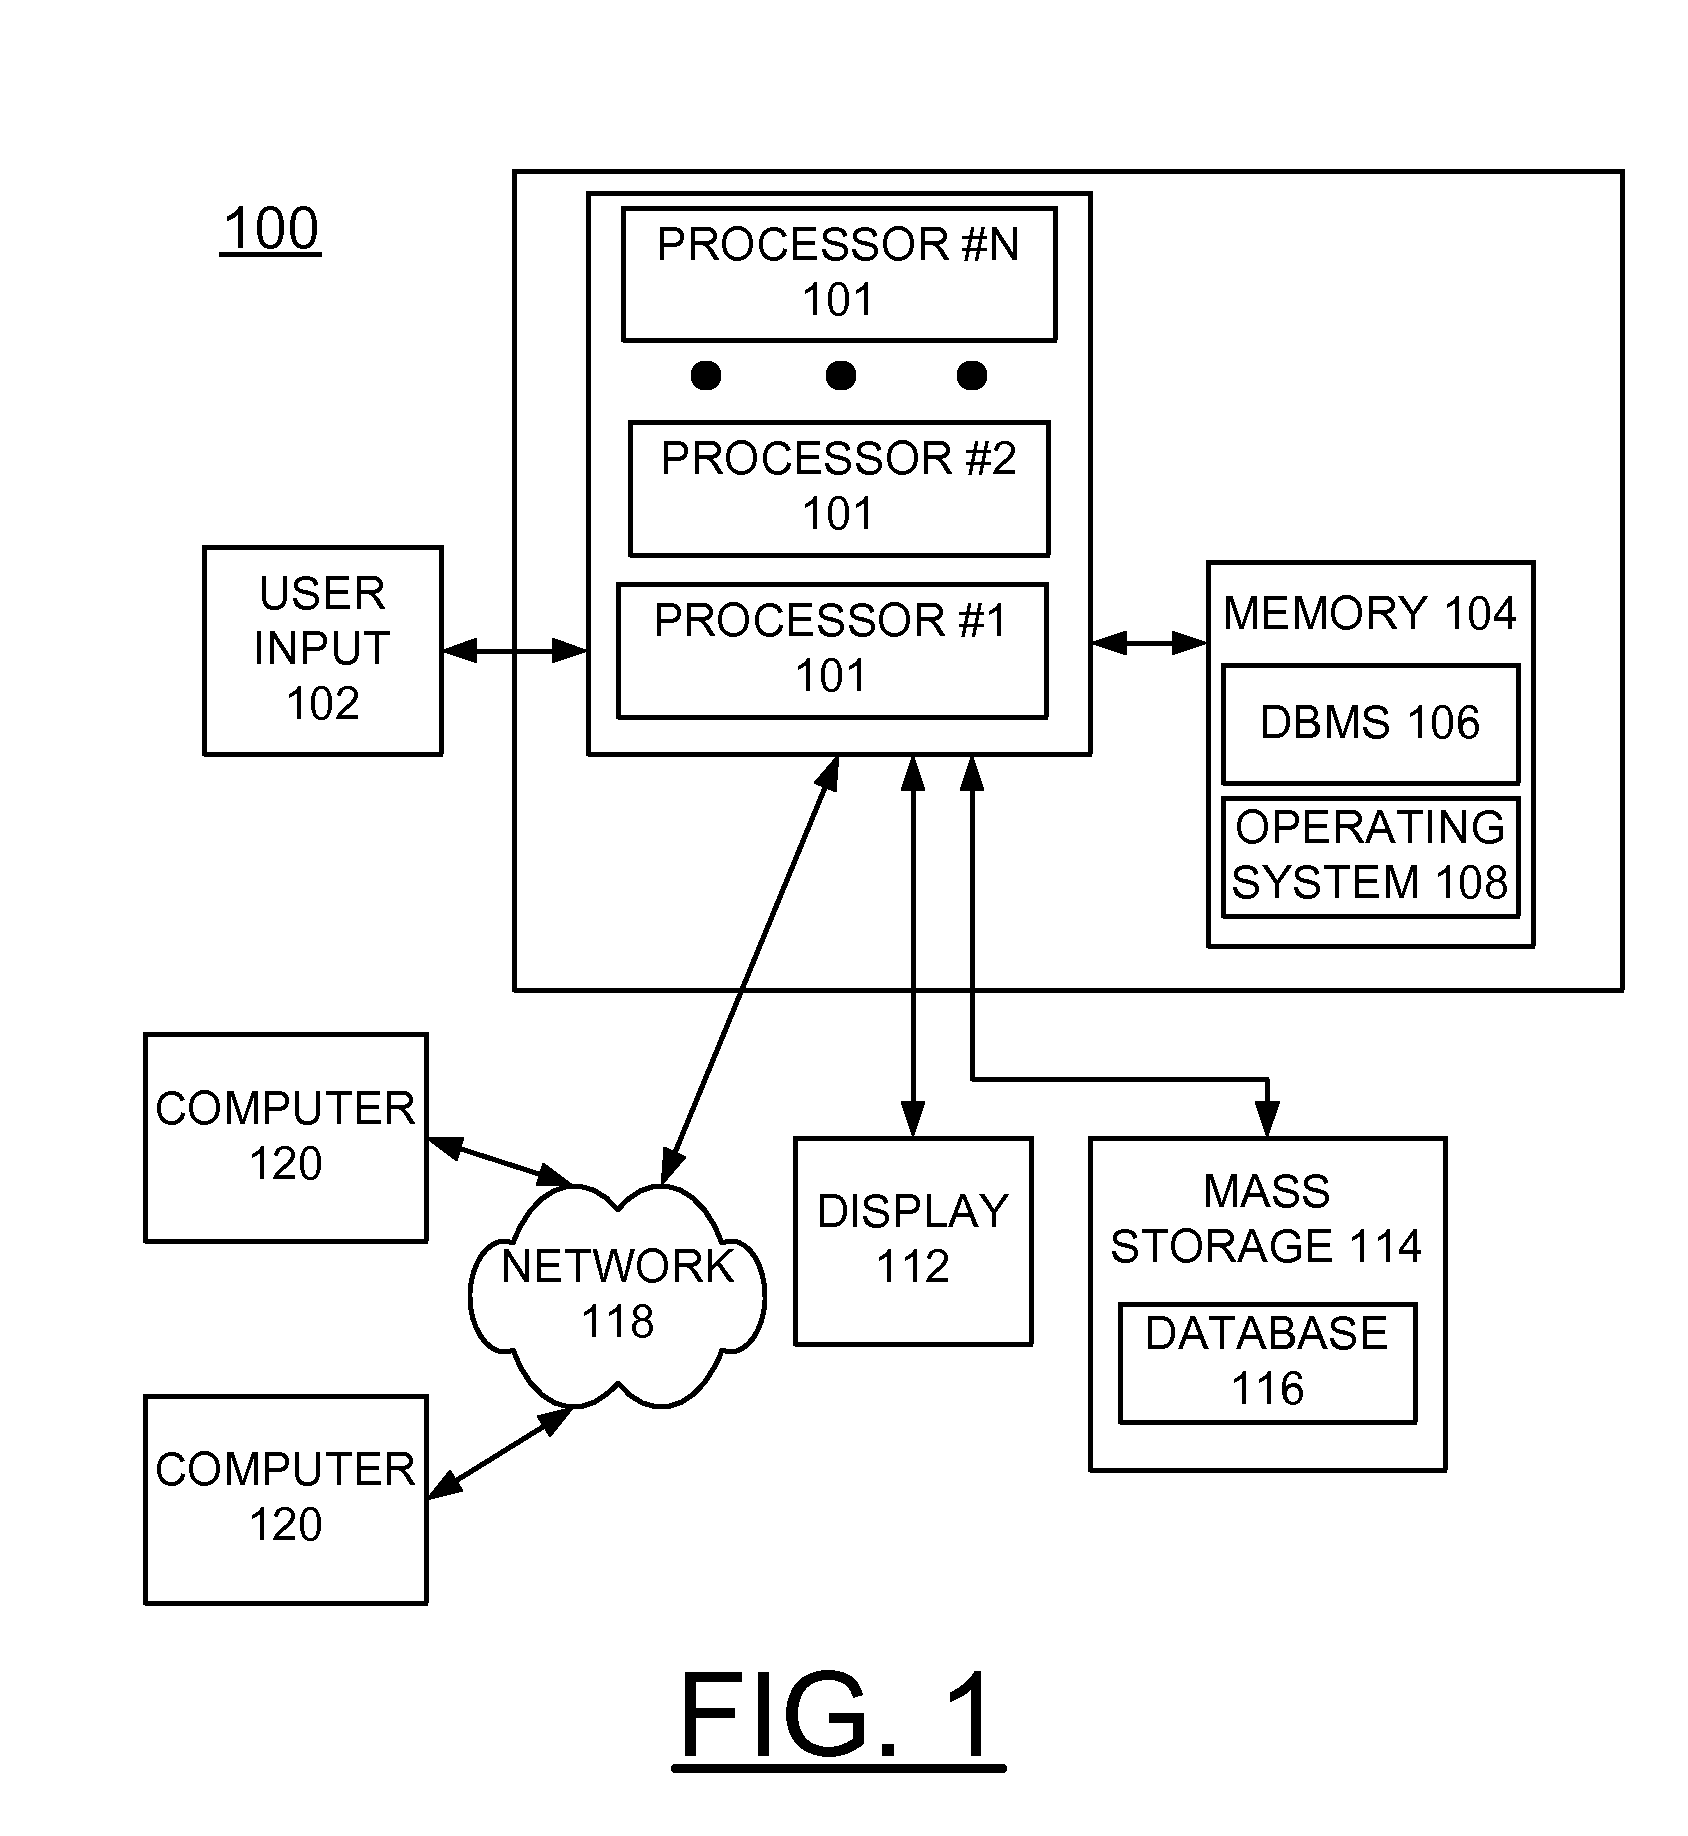 Implementing Dynamic Processor Allocation Based Upon Data Density